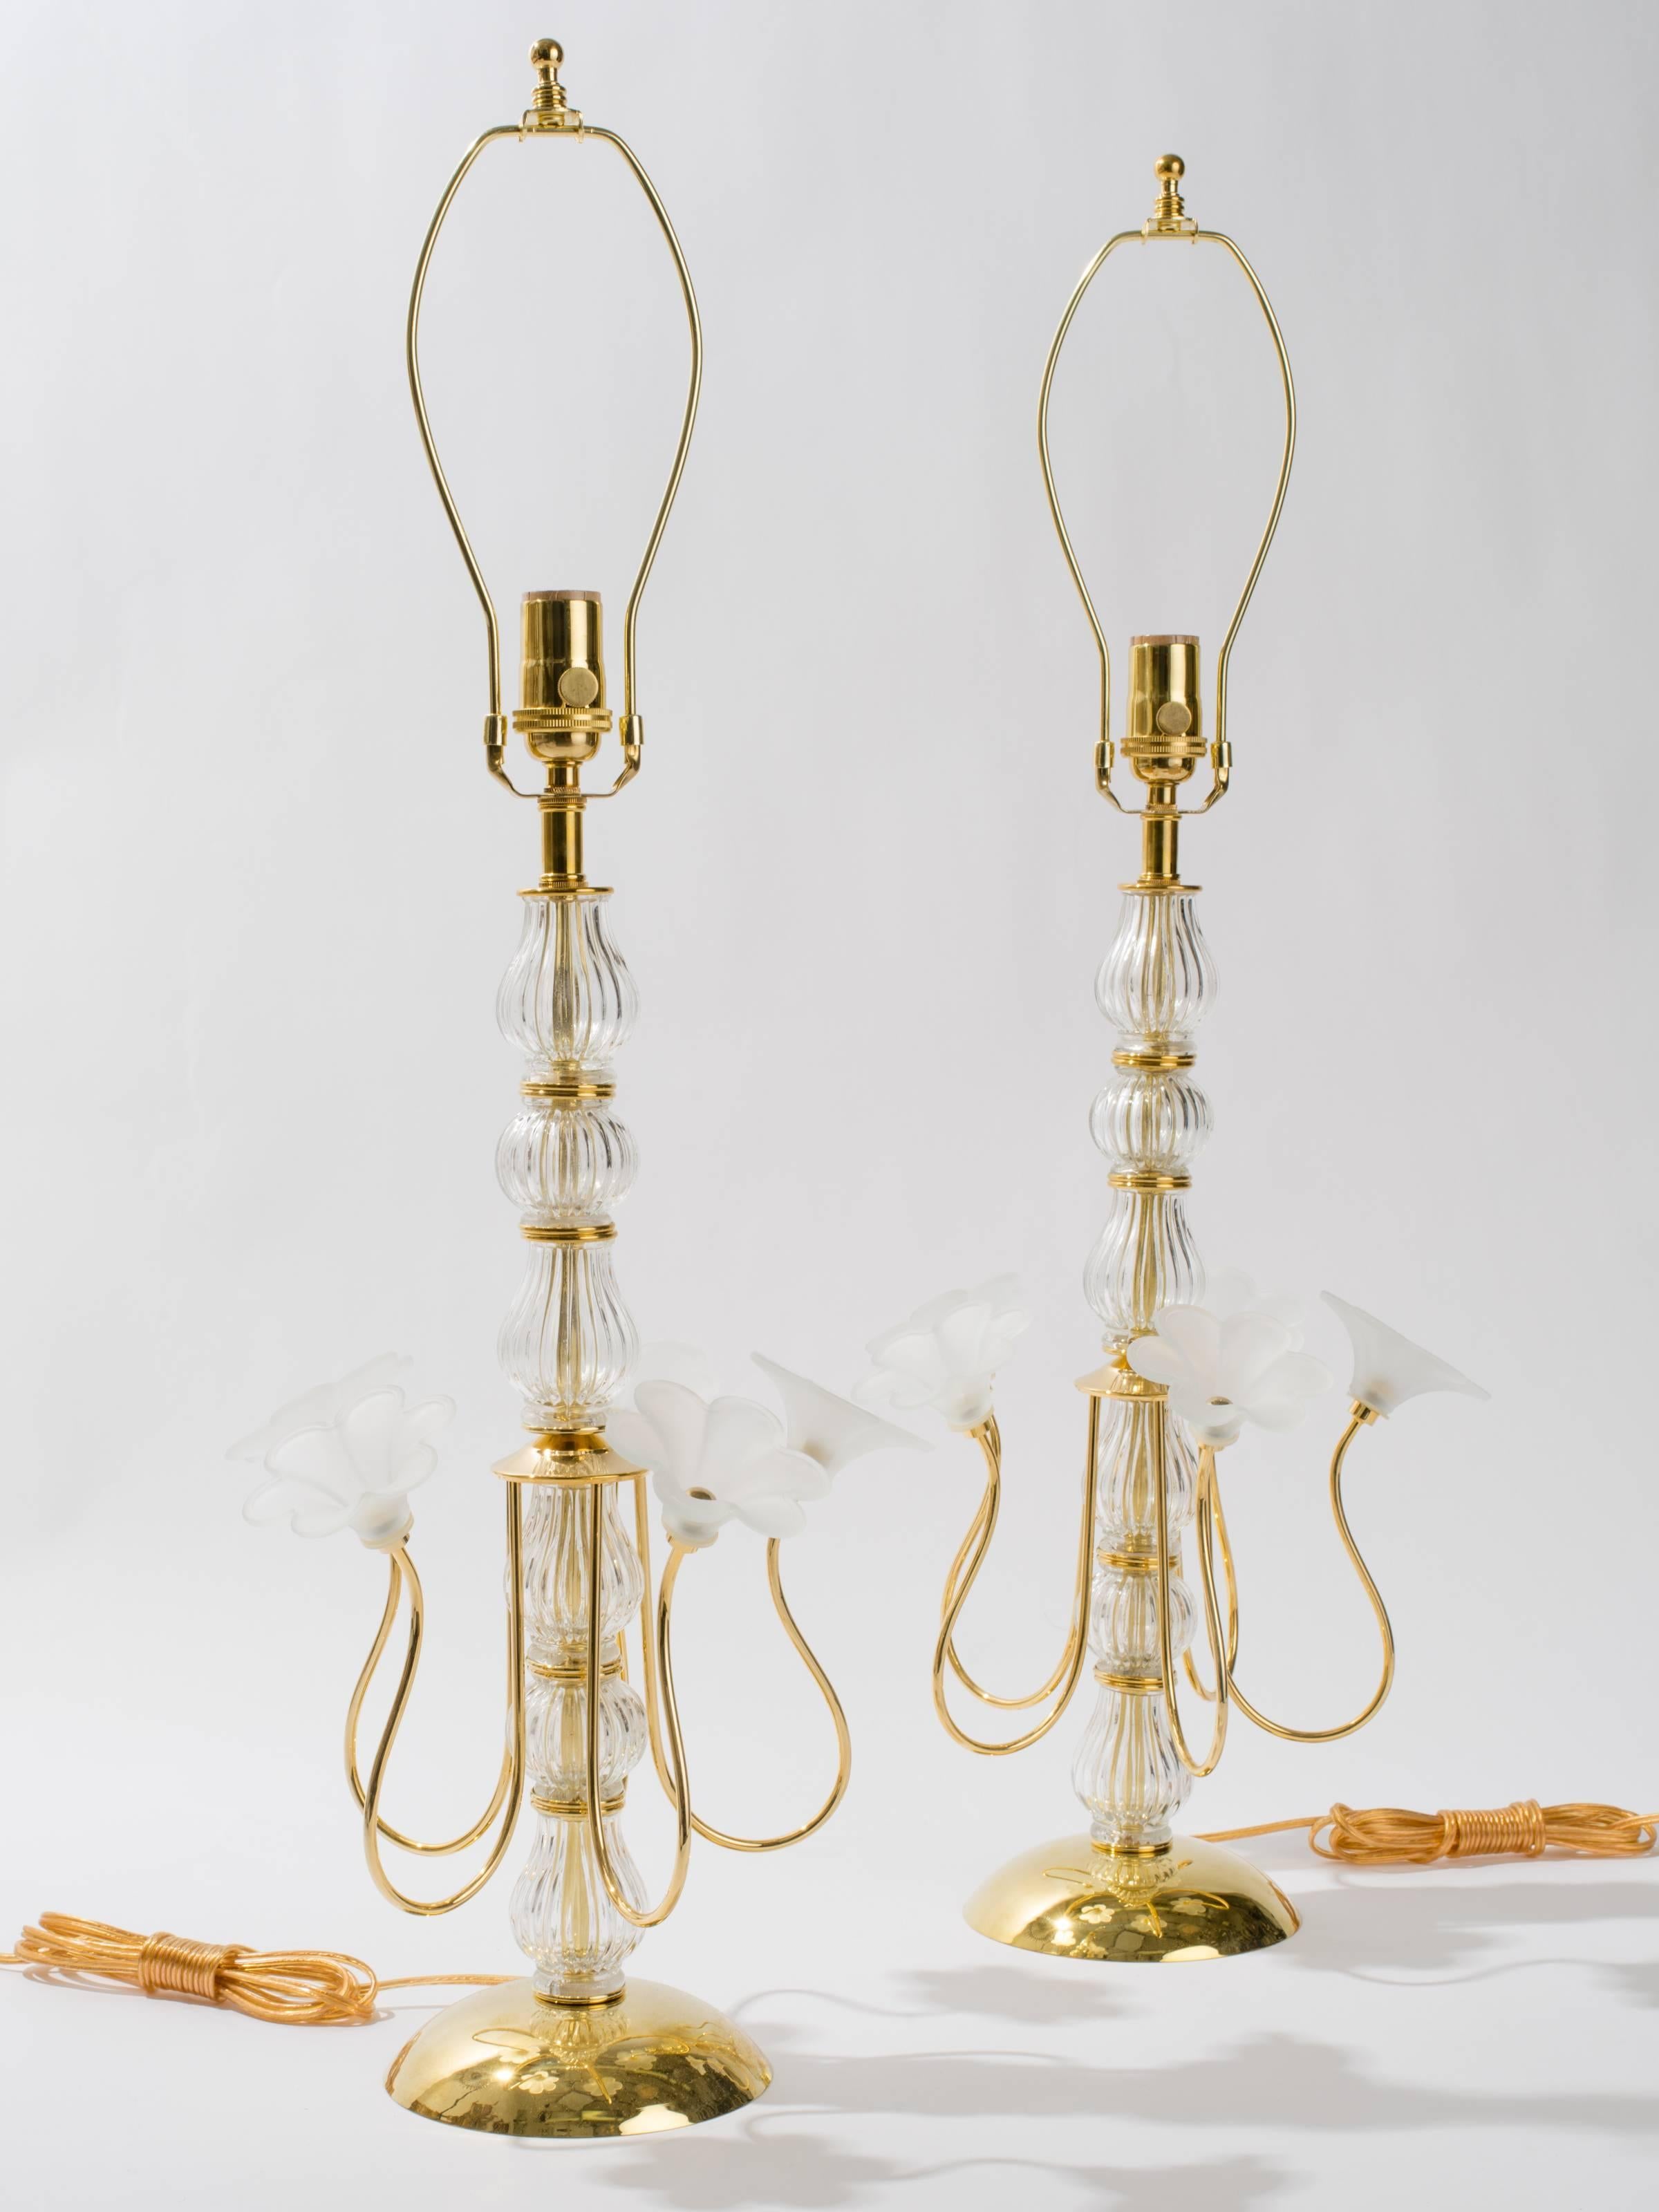 Italian floral glass lamps. Restored and rewired.